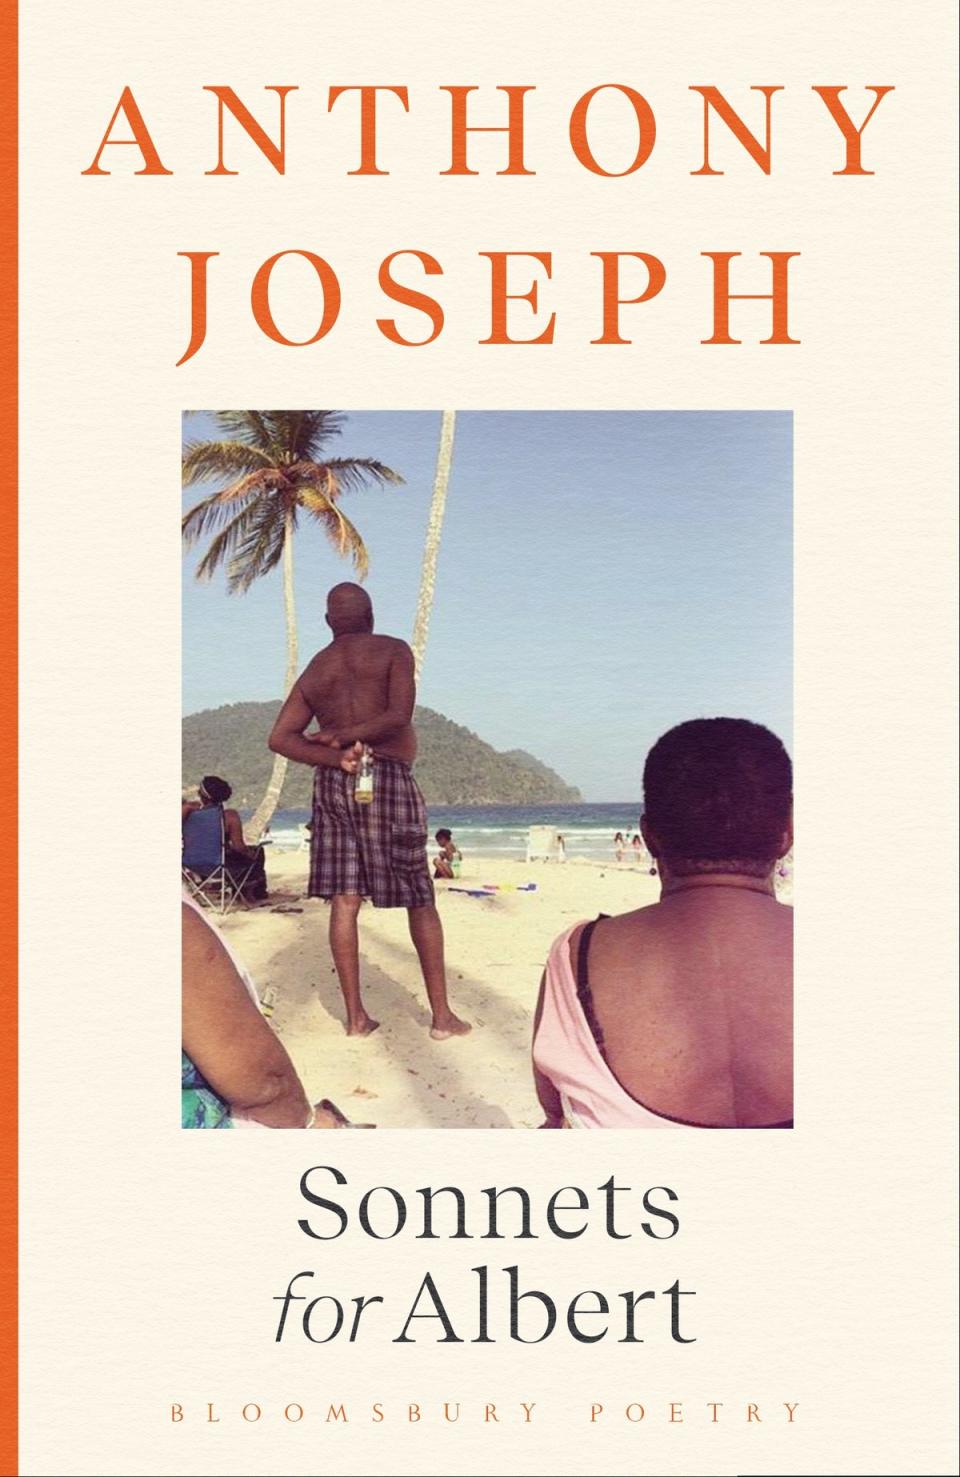 Anthony Joseph’s ‘Sonnets For Albert’ has been described as ‘a luminous collection which celebrates humanity in all its contradictions and breathes new life into this enduring form’ (source)